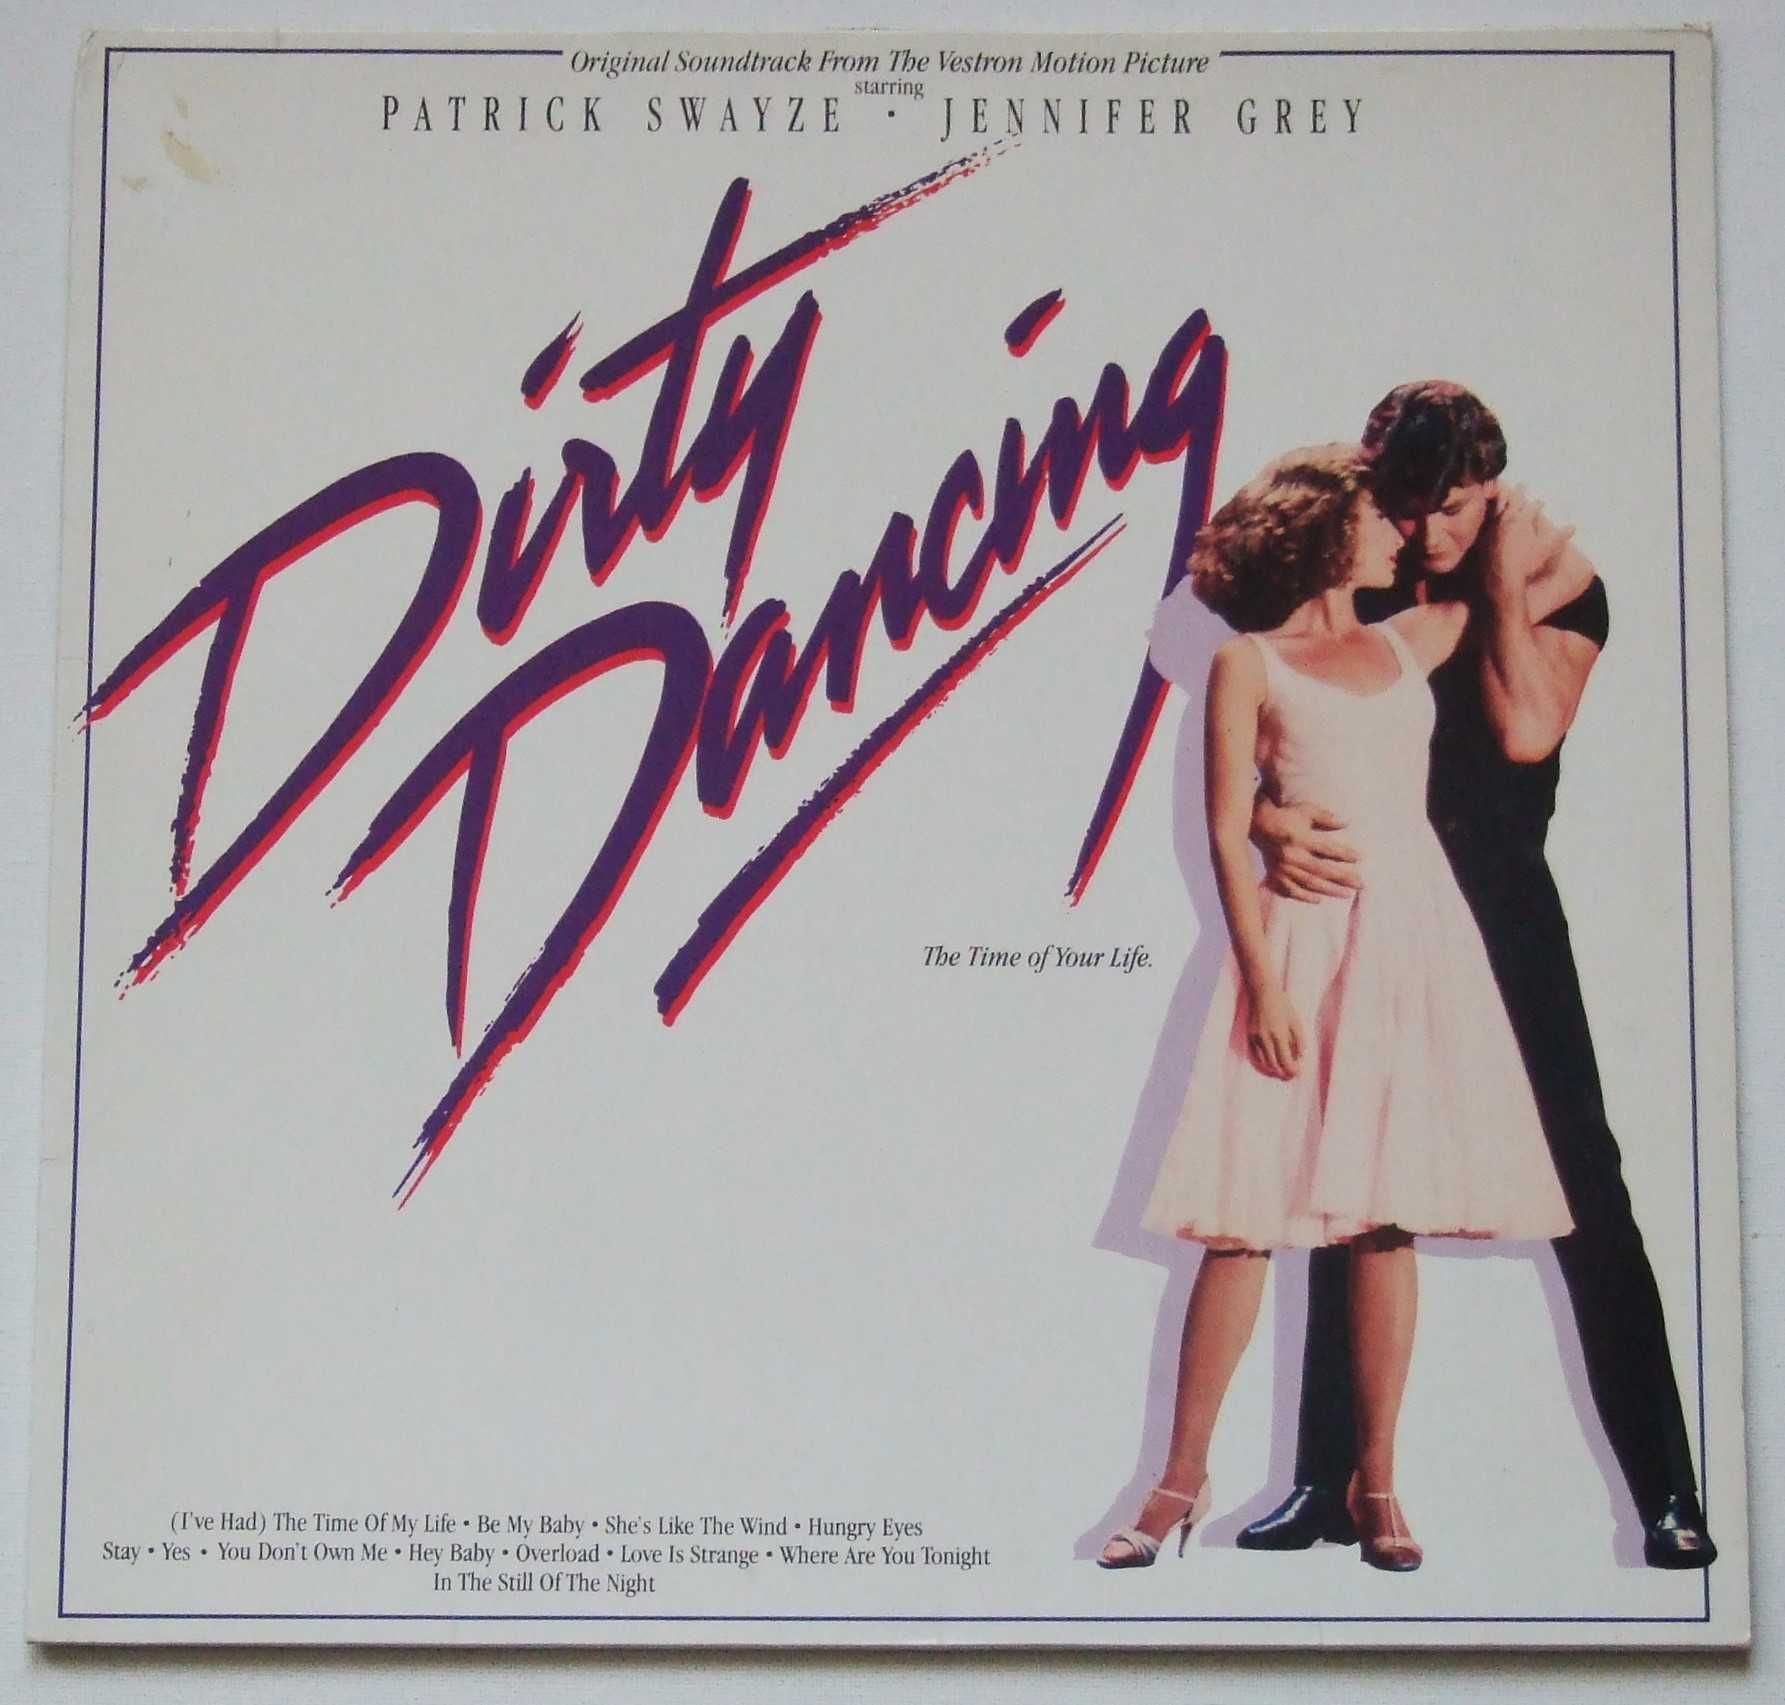 Dirty Dancing (Original Soundtrack From The Vestron Motion Picture)